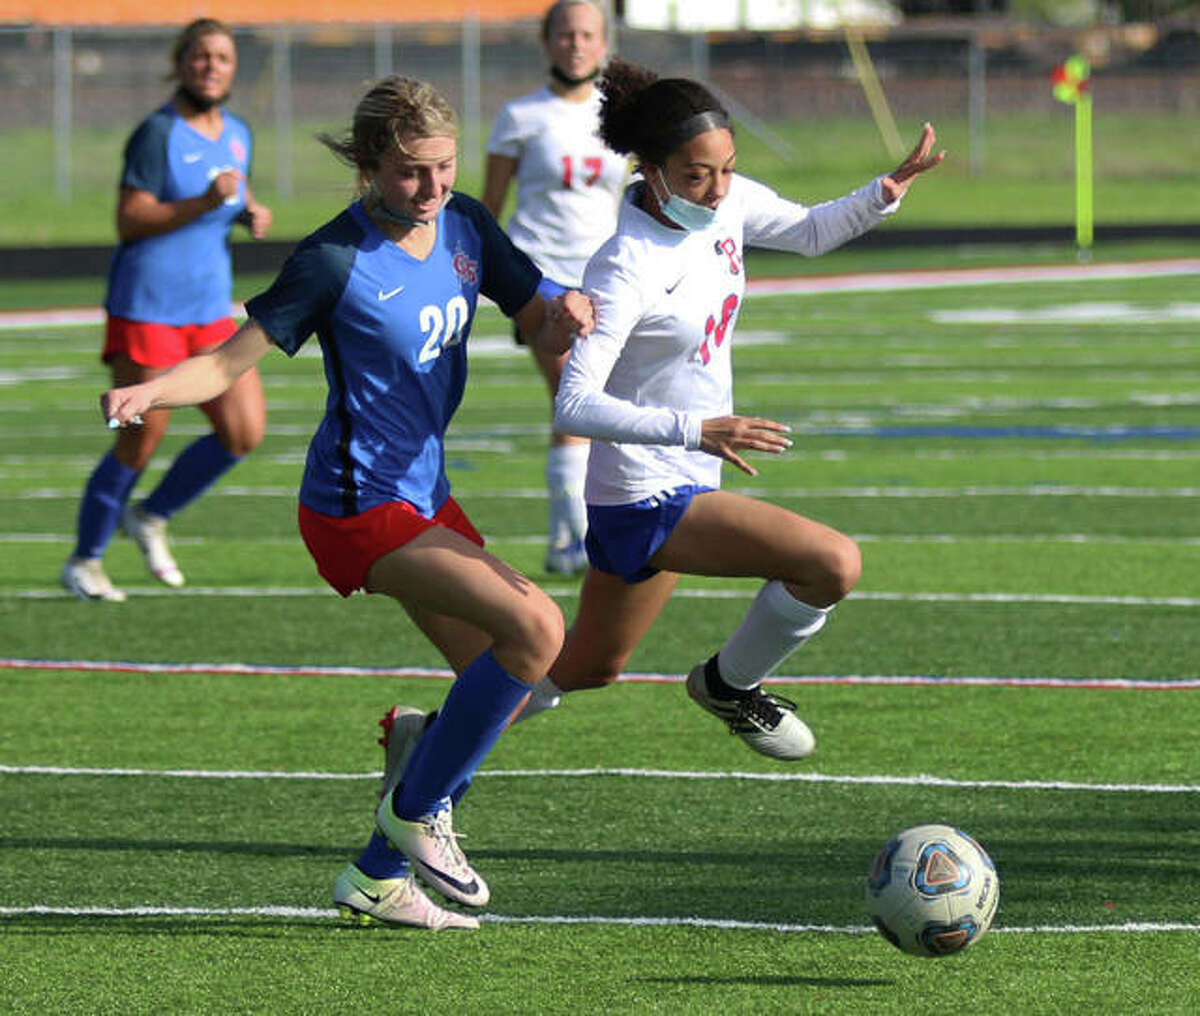 Roxana’s Jada Covington (right) competes with Carlinville’s Jill Stayton for ball during an April 29 match in Carlinville. On Saturday in Belleville, Covington scored a goal to help the Shells stay unbeaten with a 3-0 win over Highland in the Metro Cup.